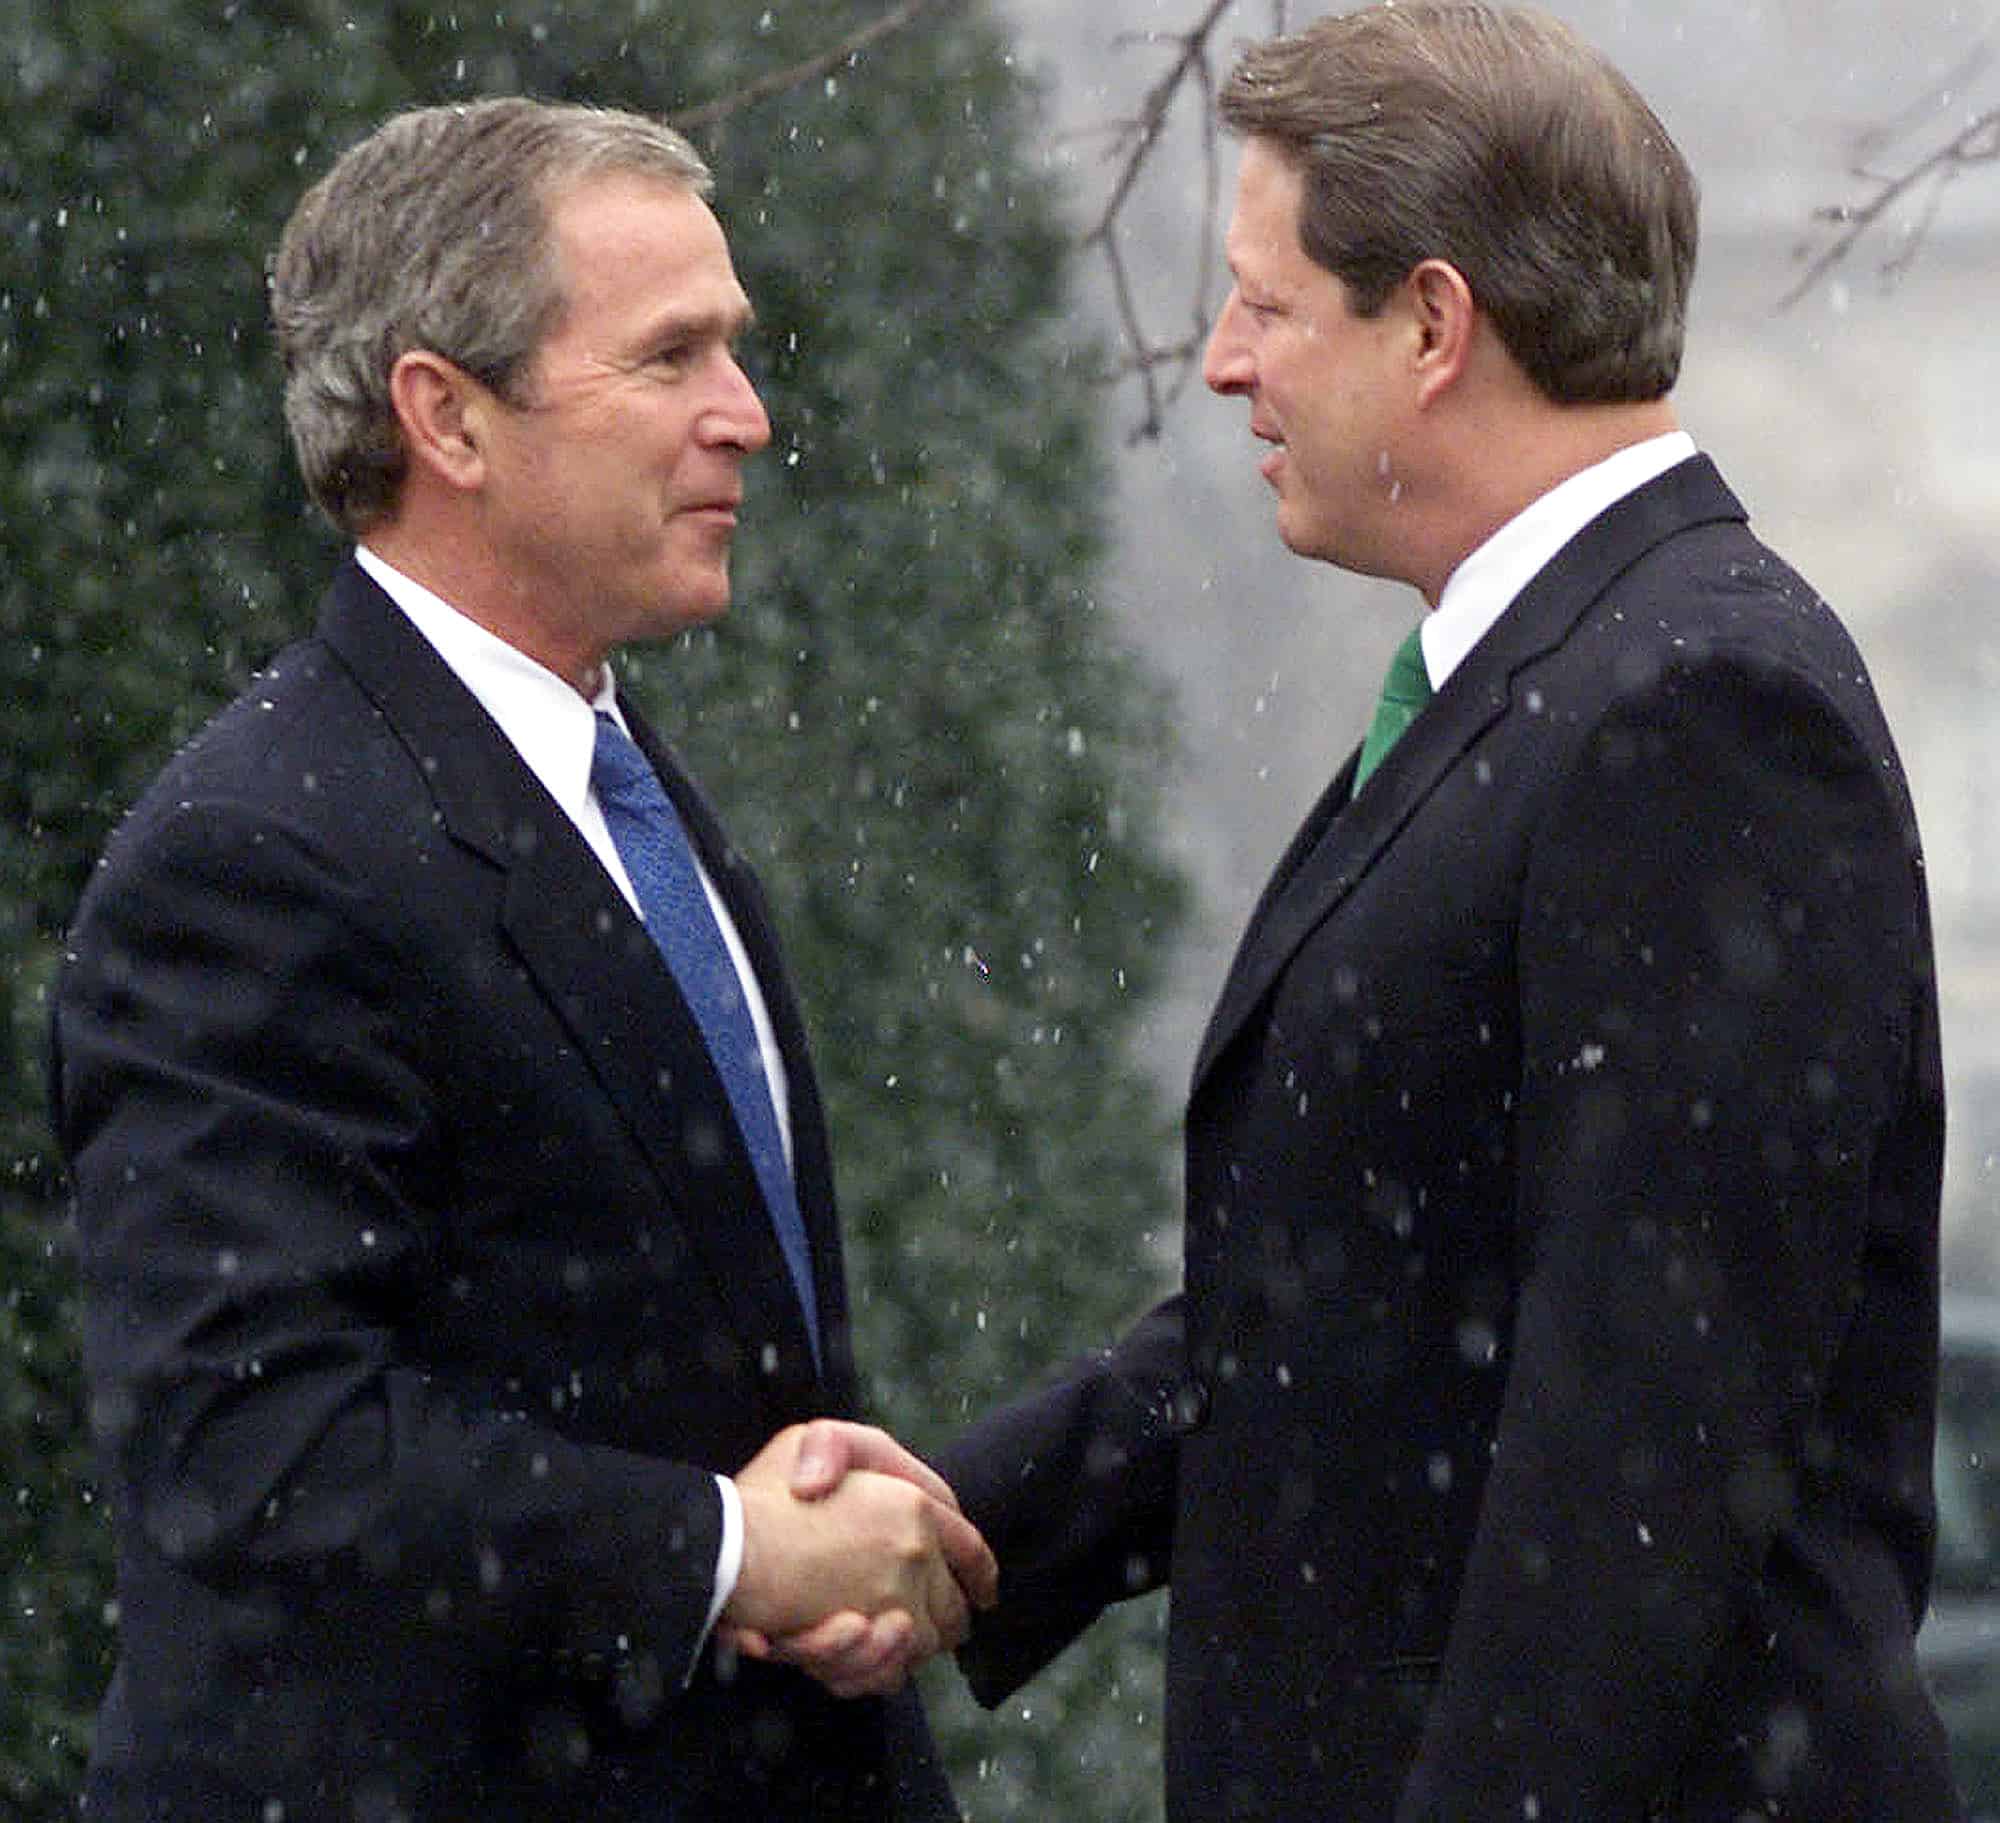 Bush Meets With Gore